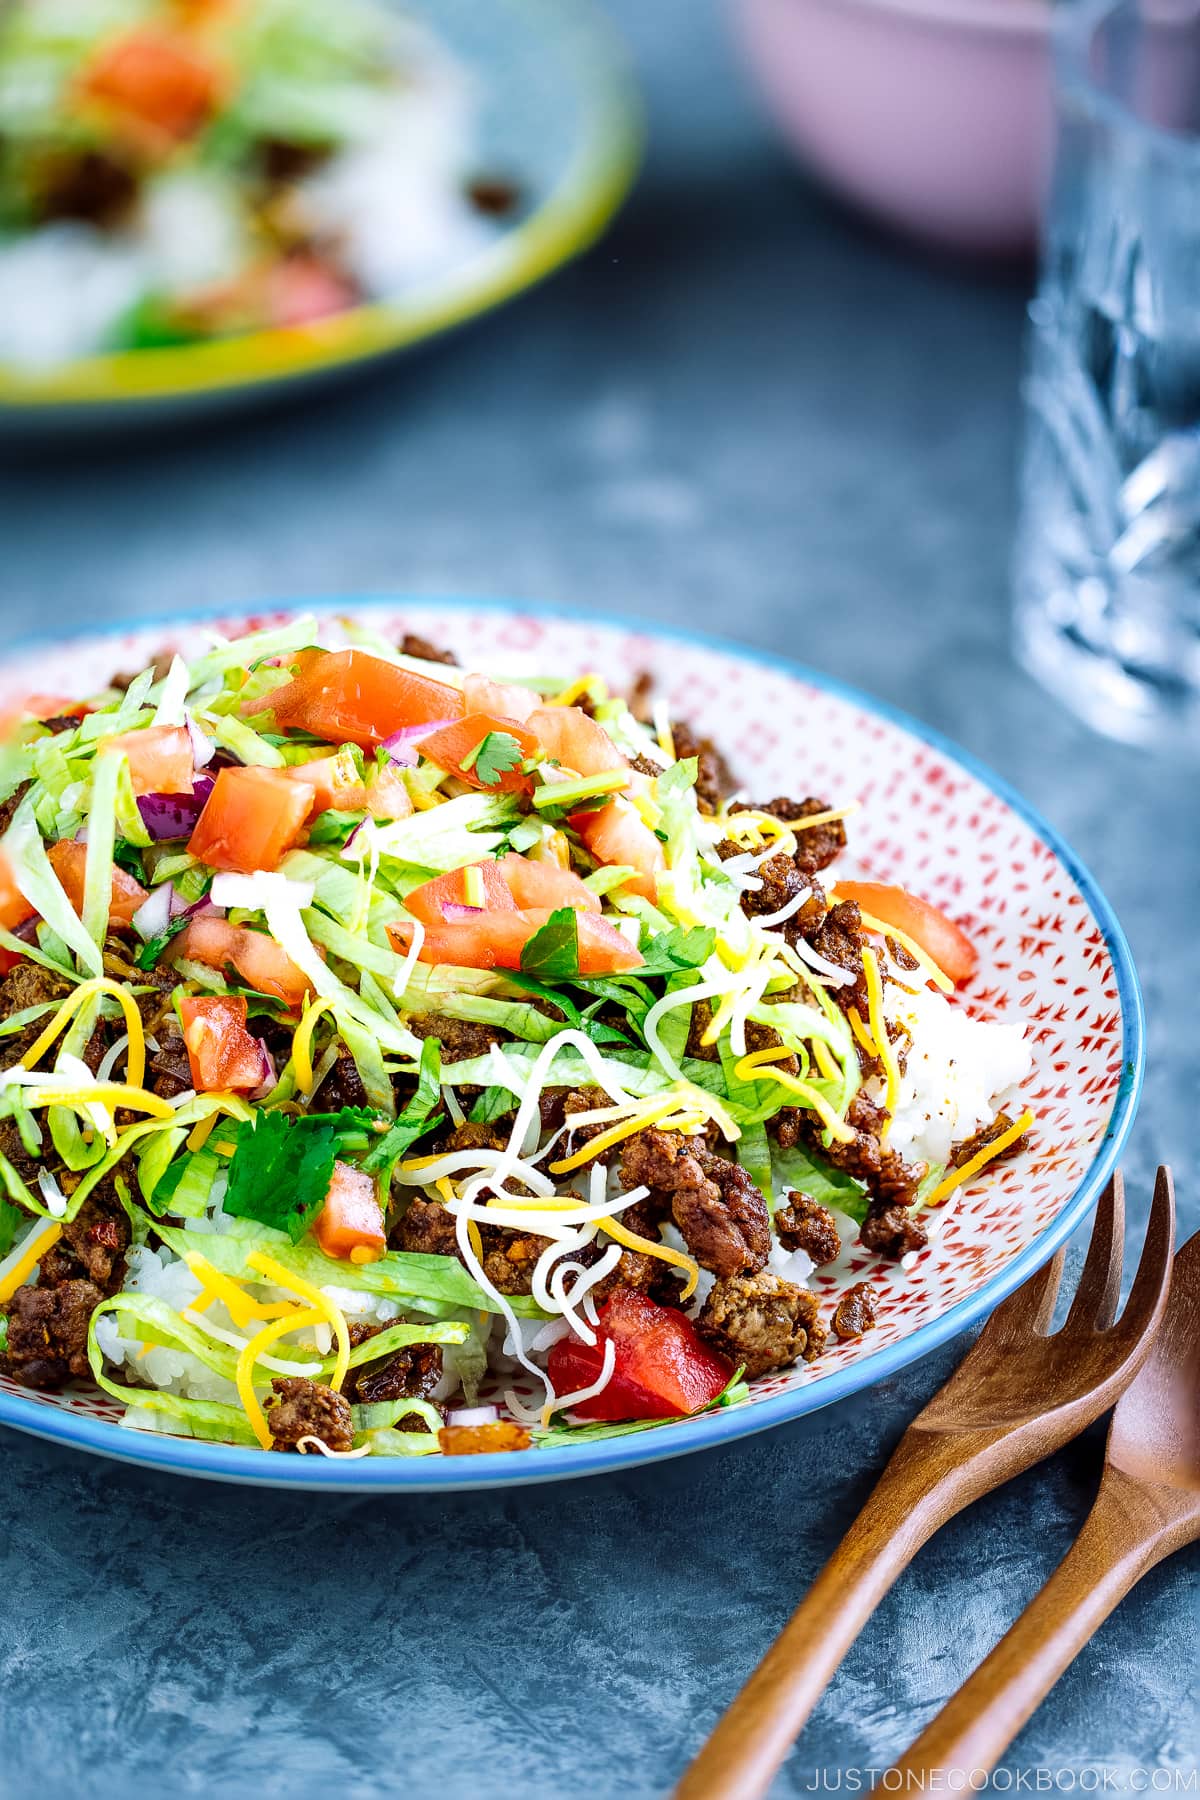 Colorful plates containing Okinawa Taco Rice with flavorful taco fixings served on a bed of hot Japanese white rice.